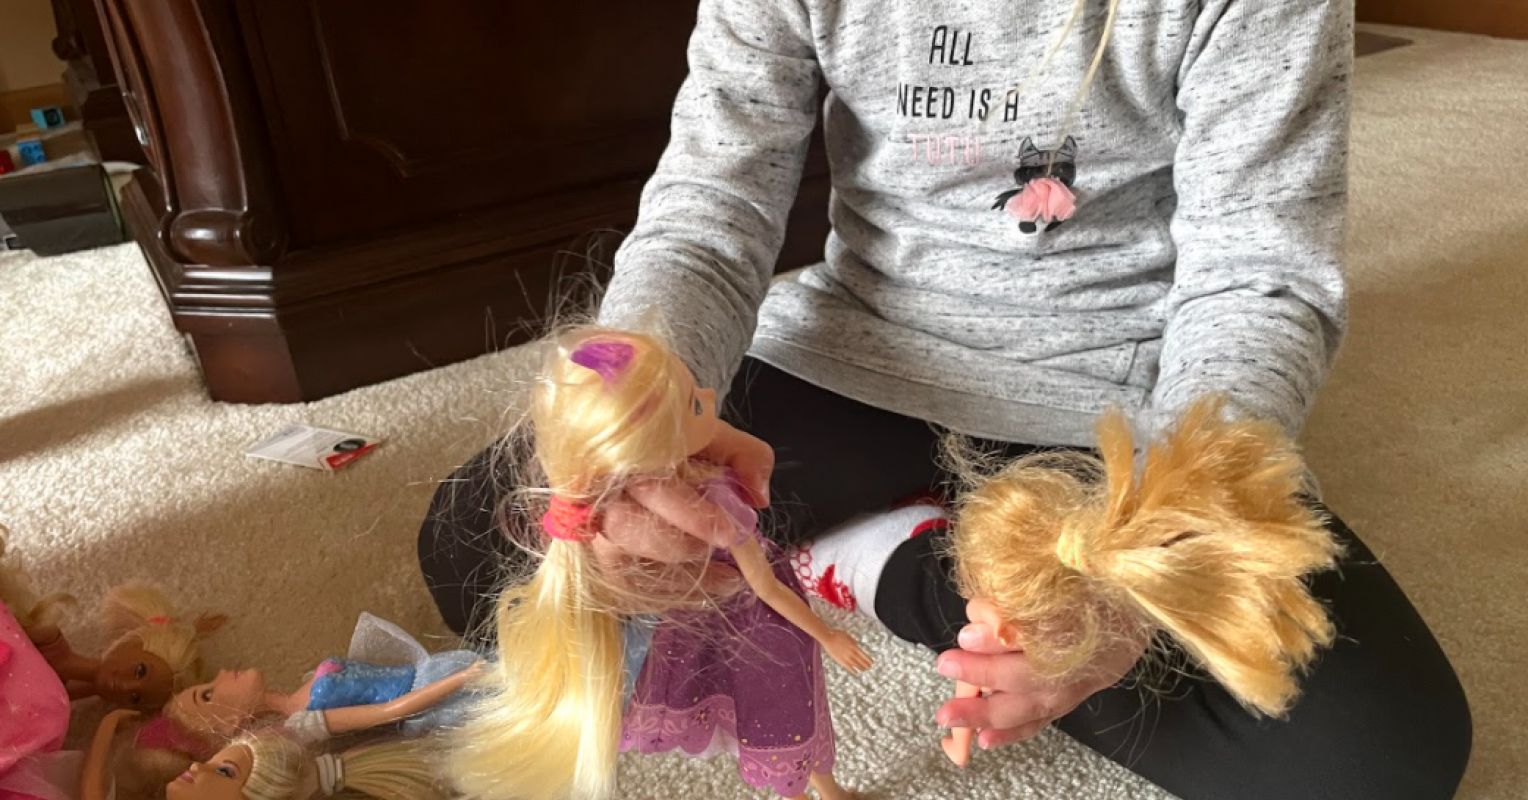 Barbies May Do Damage That Realistic Dolls Can't Undo